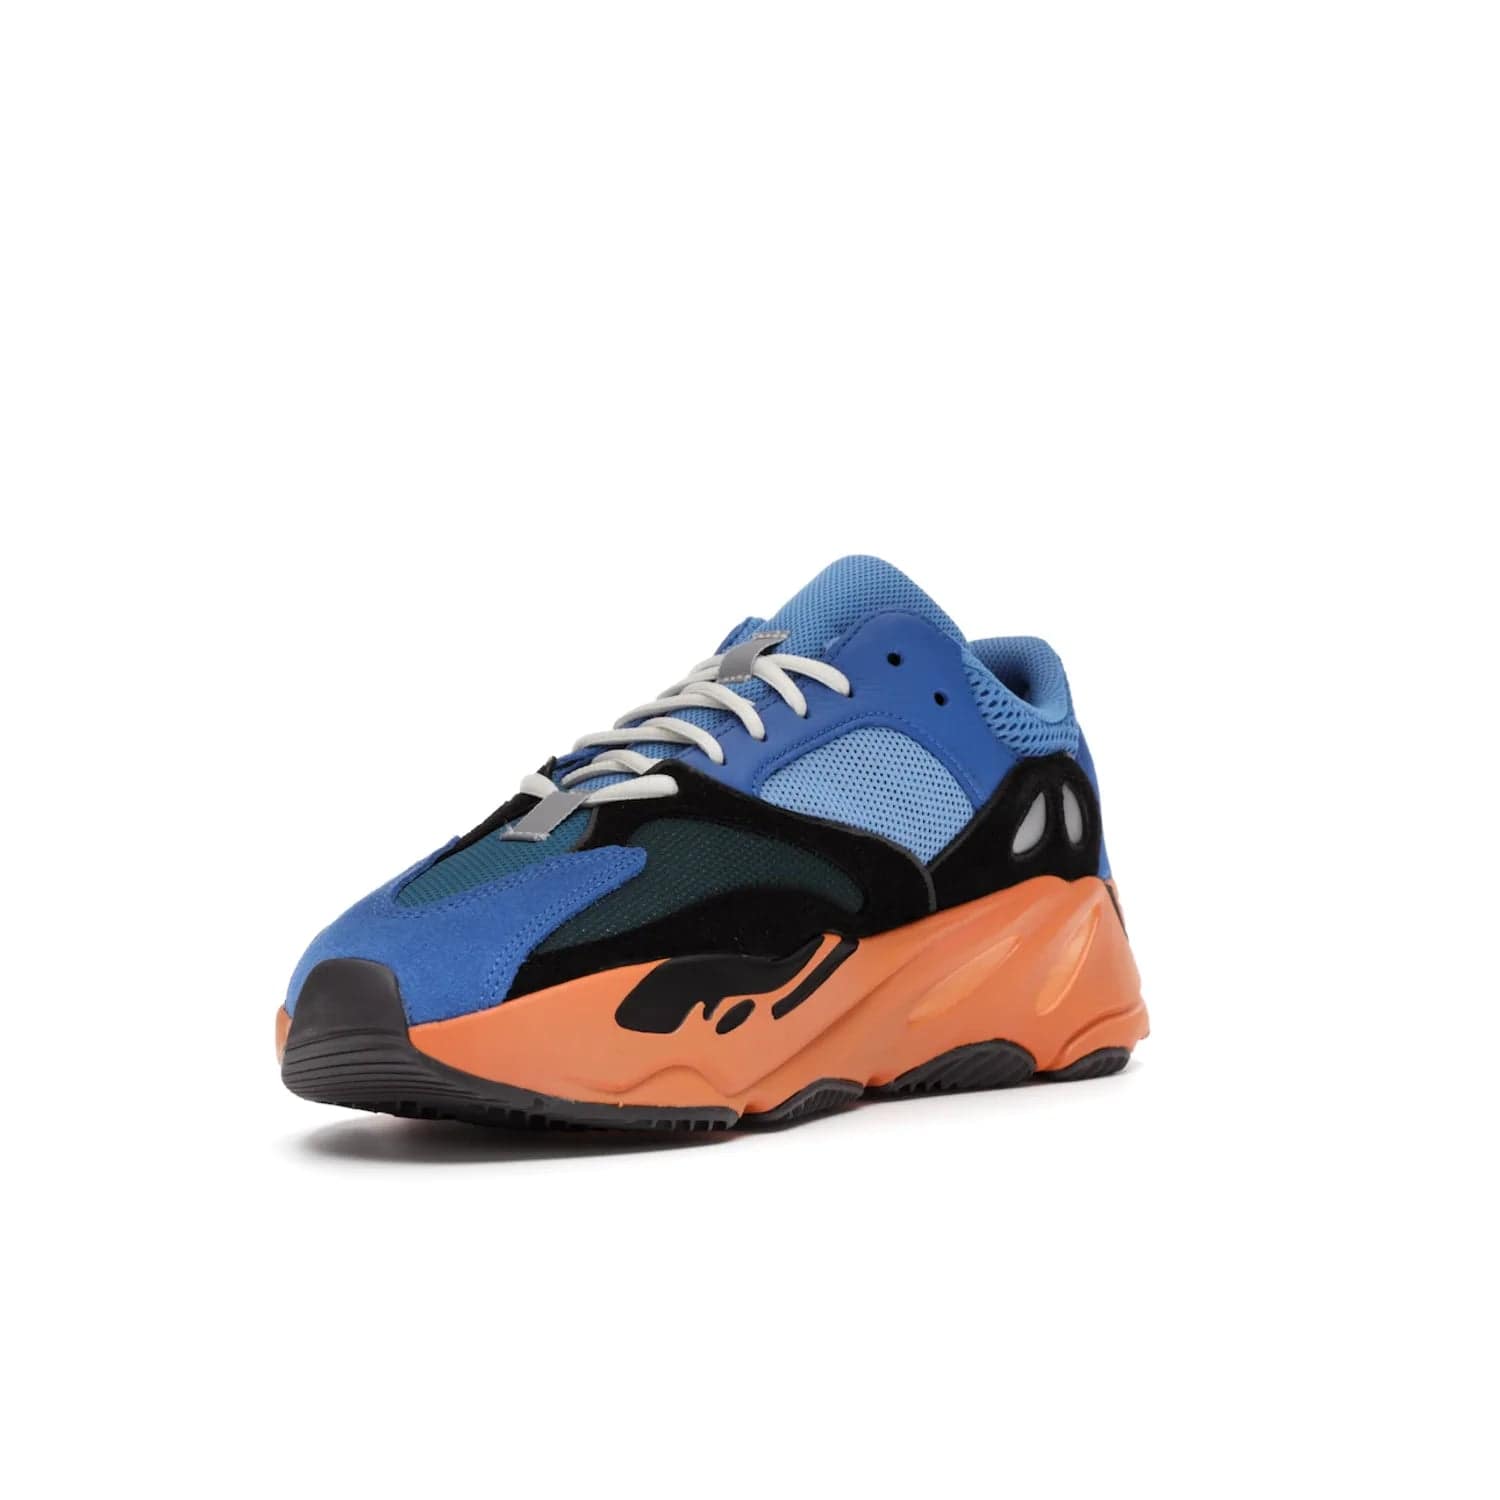 adidas Yeezy Boost 700 Bright Blue - Image 14 - Only at www.BallersClubKickz.com - Iconic sneaker style meets vibrant colour with the adidas Yeezy Boost 700 Bright Blue. Reflective accents, turquoise and teal panels, bright orange midsole and black outsole make for a bold release. April 2021.